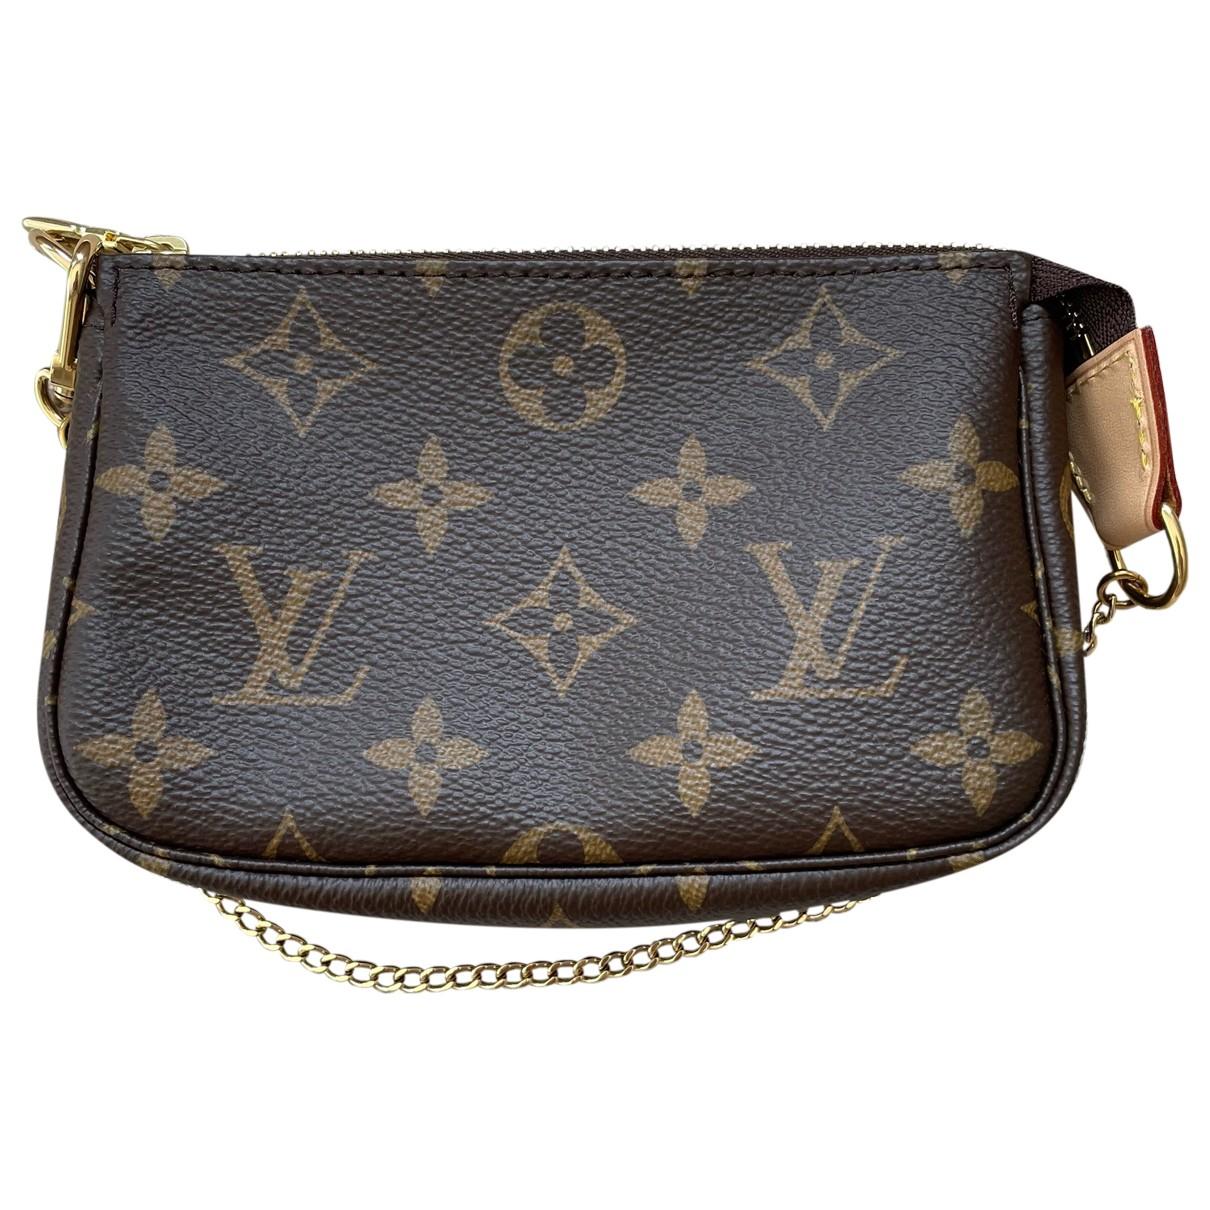 Louis Vuitton - Authenticated Neverfull Clutch Bag - Leather Brown Plain For Woman, Never Worn